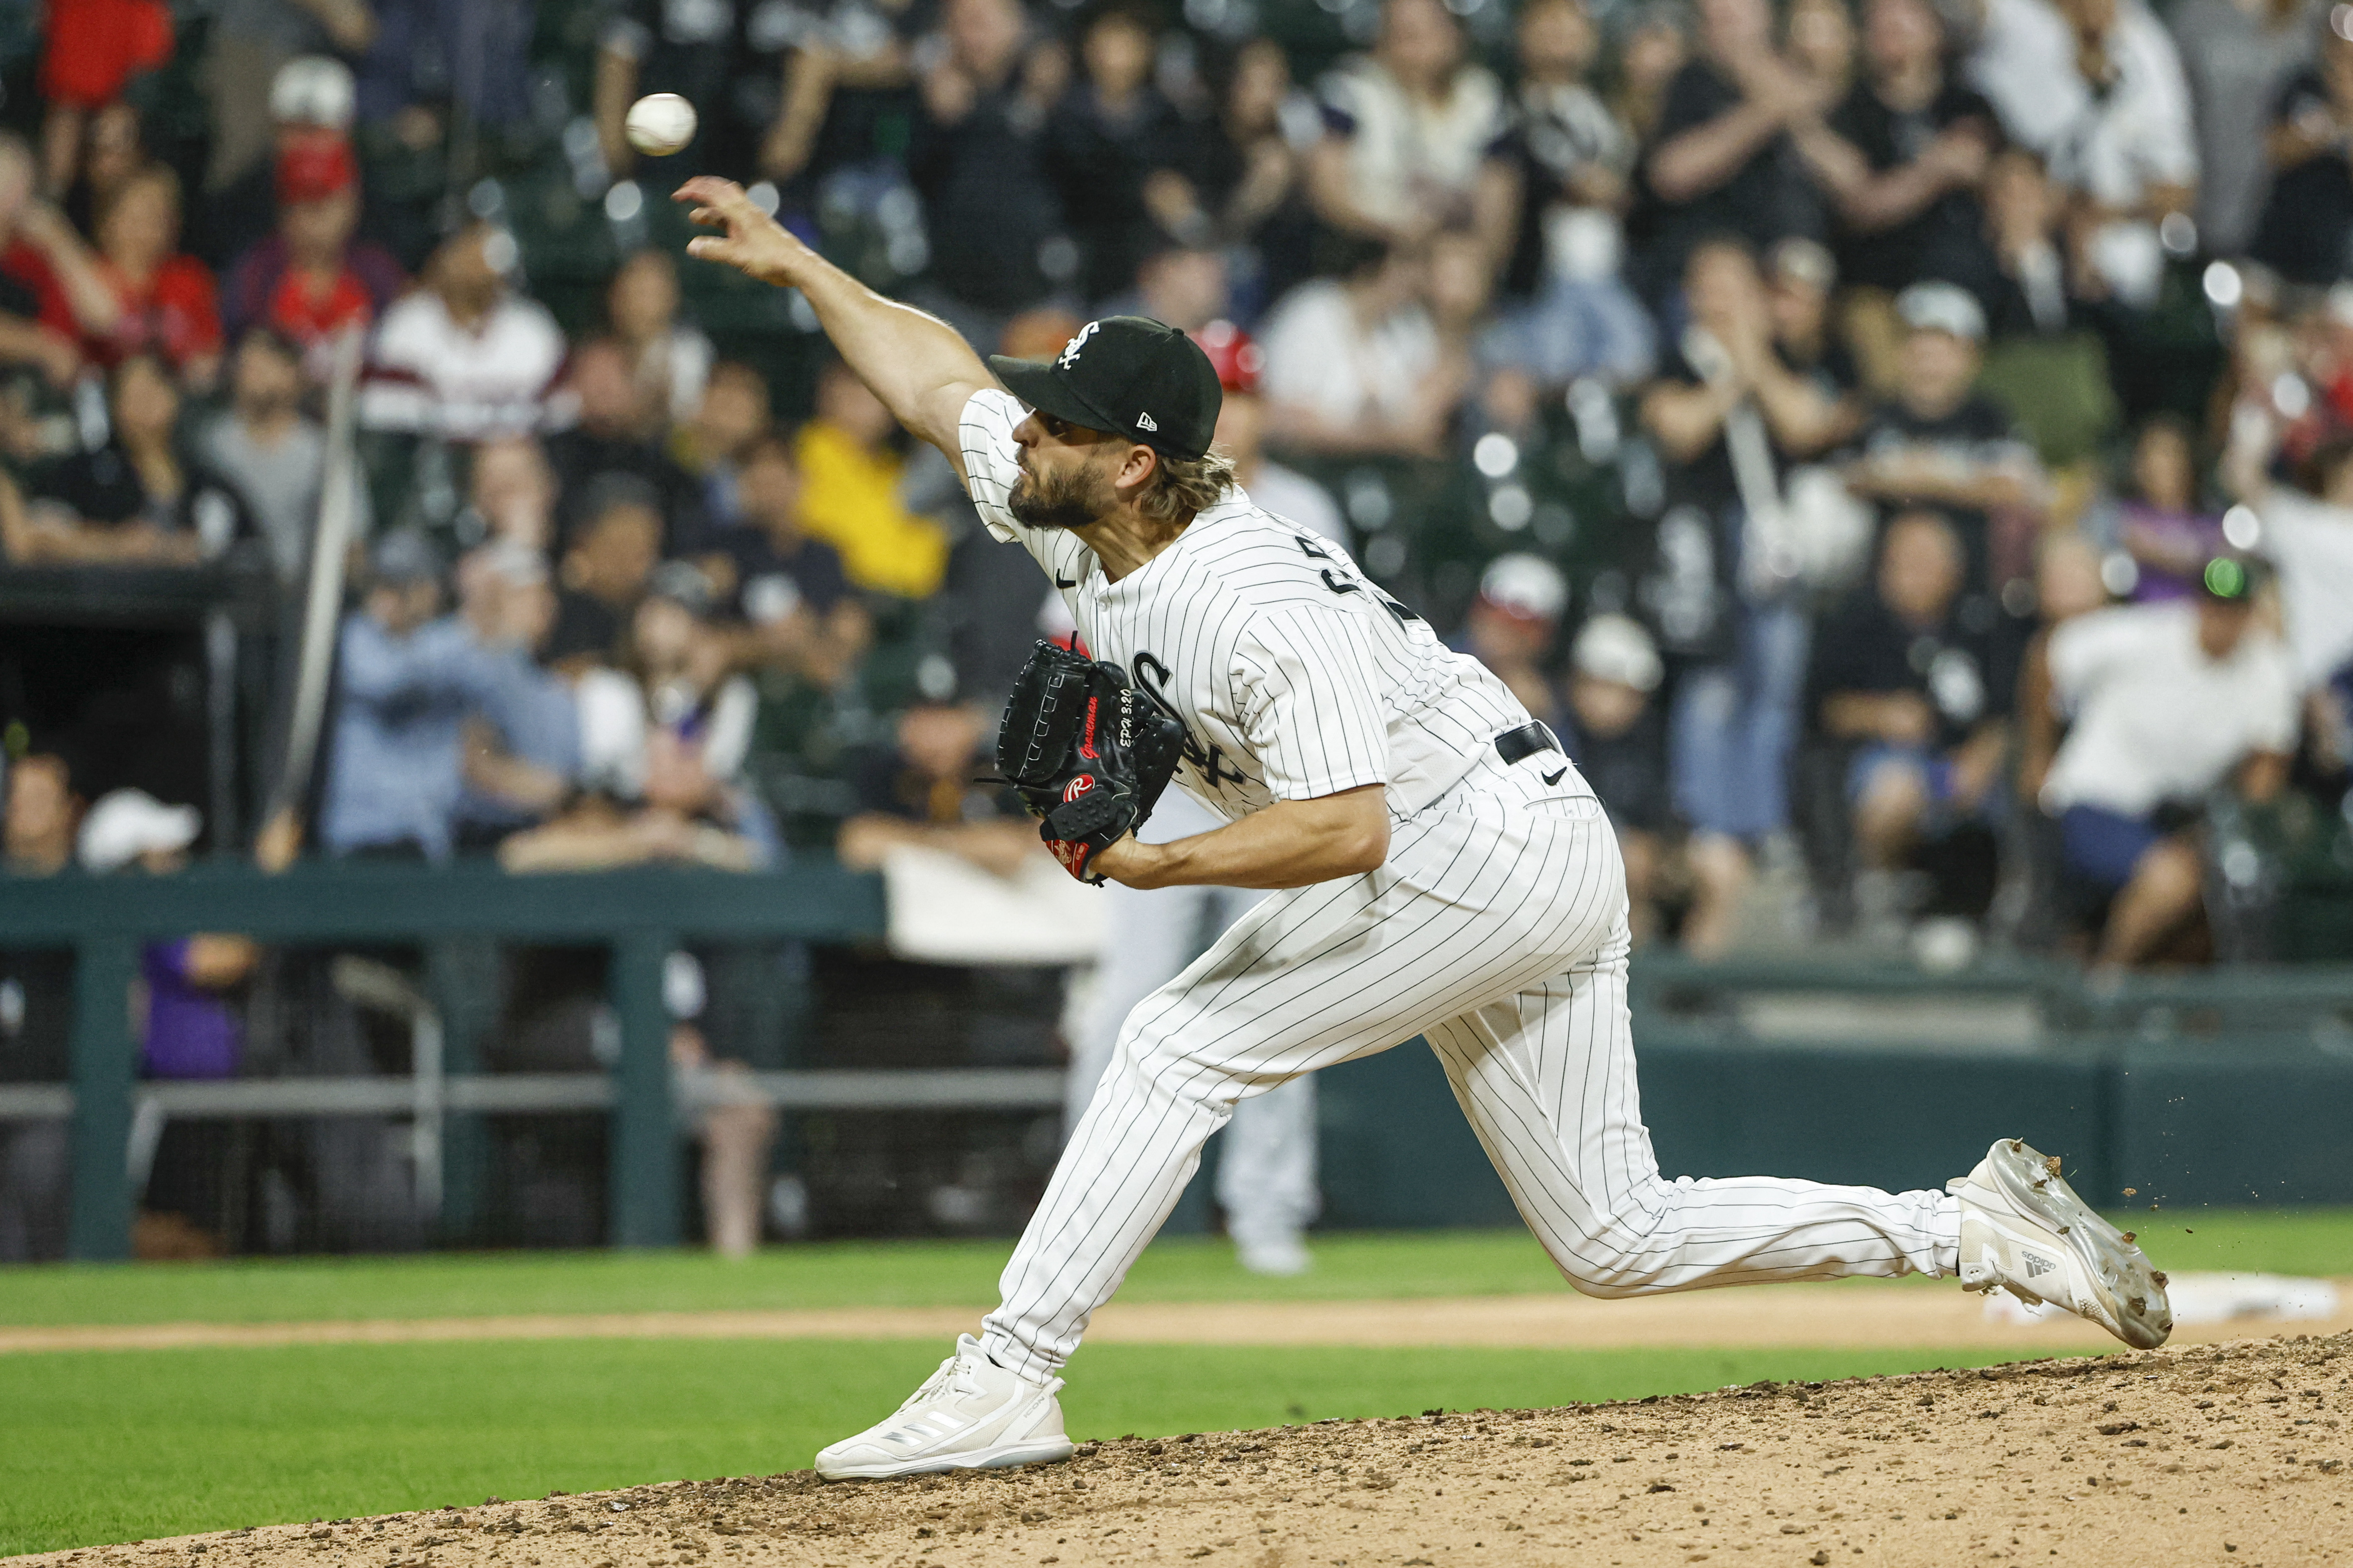 White Sox unload vs. Angels to end skid